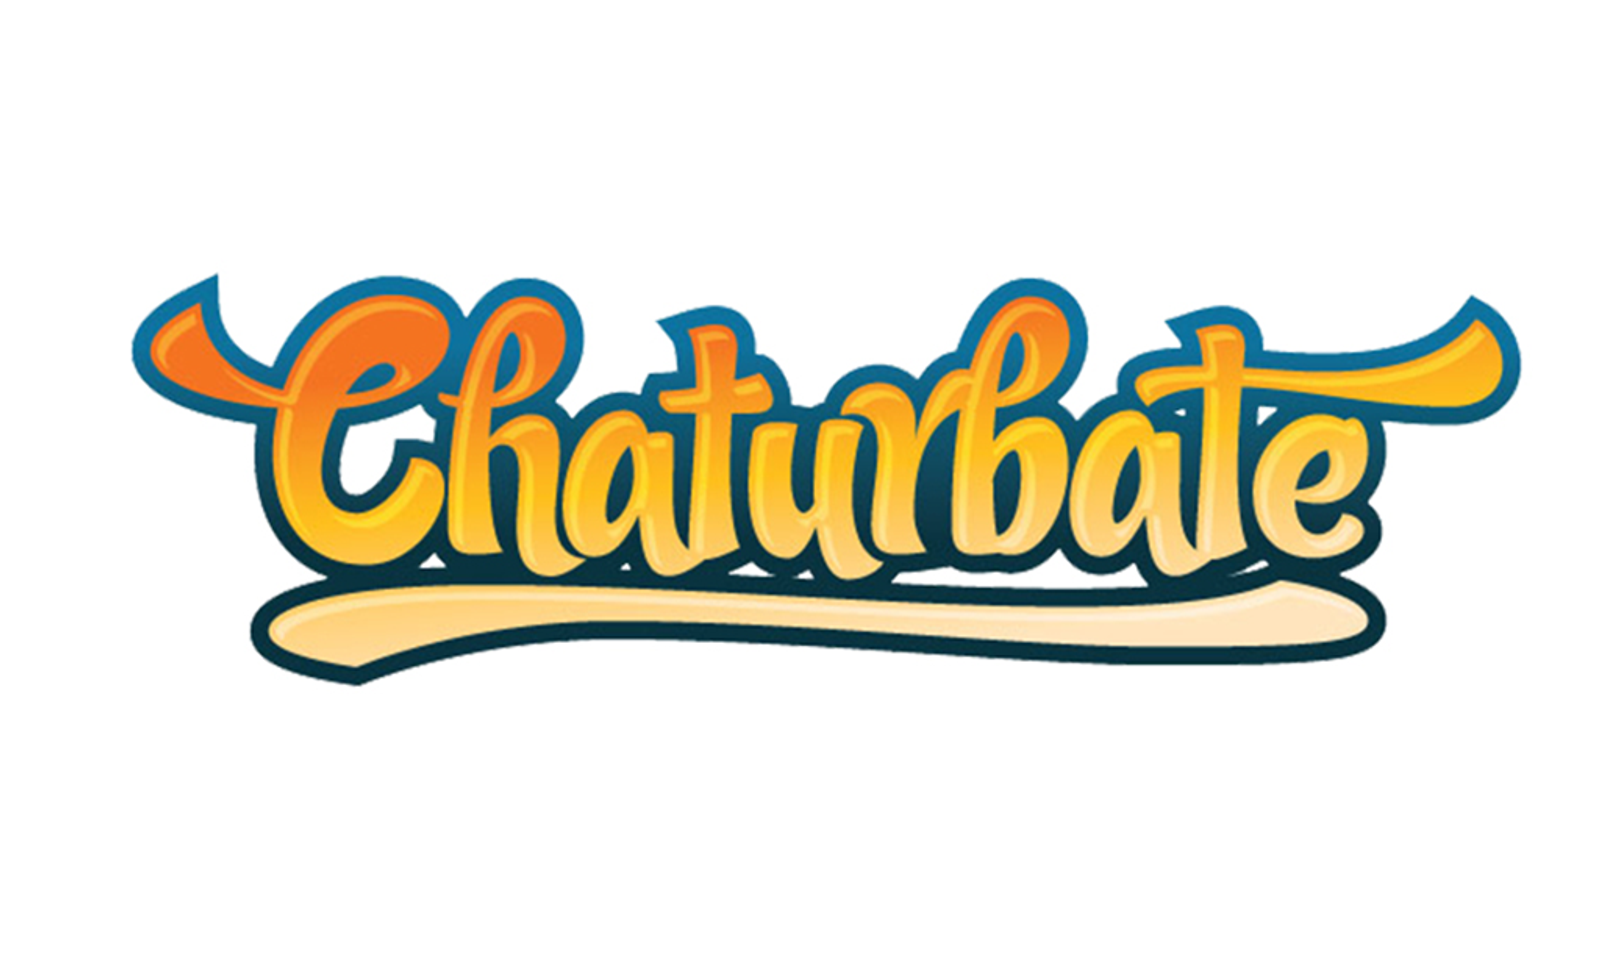 Chaturbate Recognized With Multiple Wins at the 2020 YNOT Awards